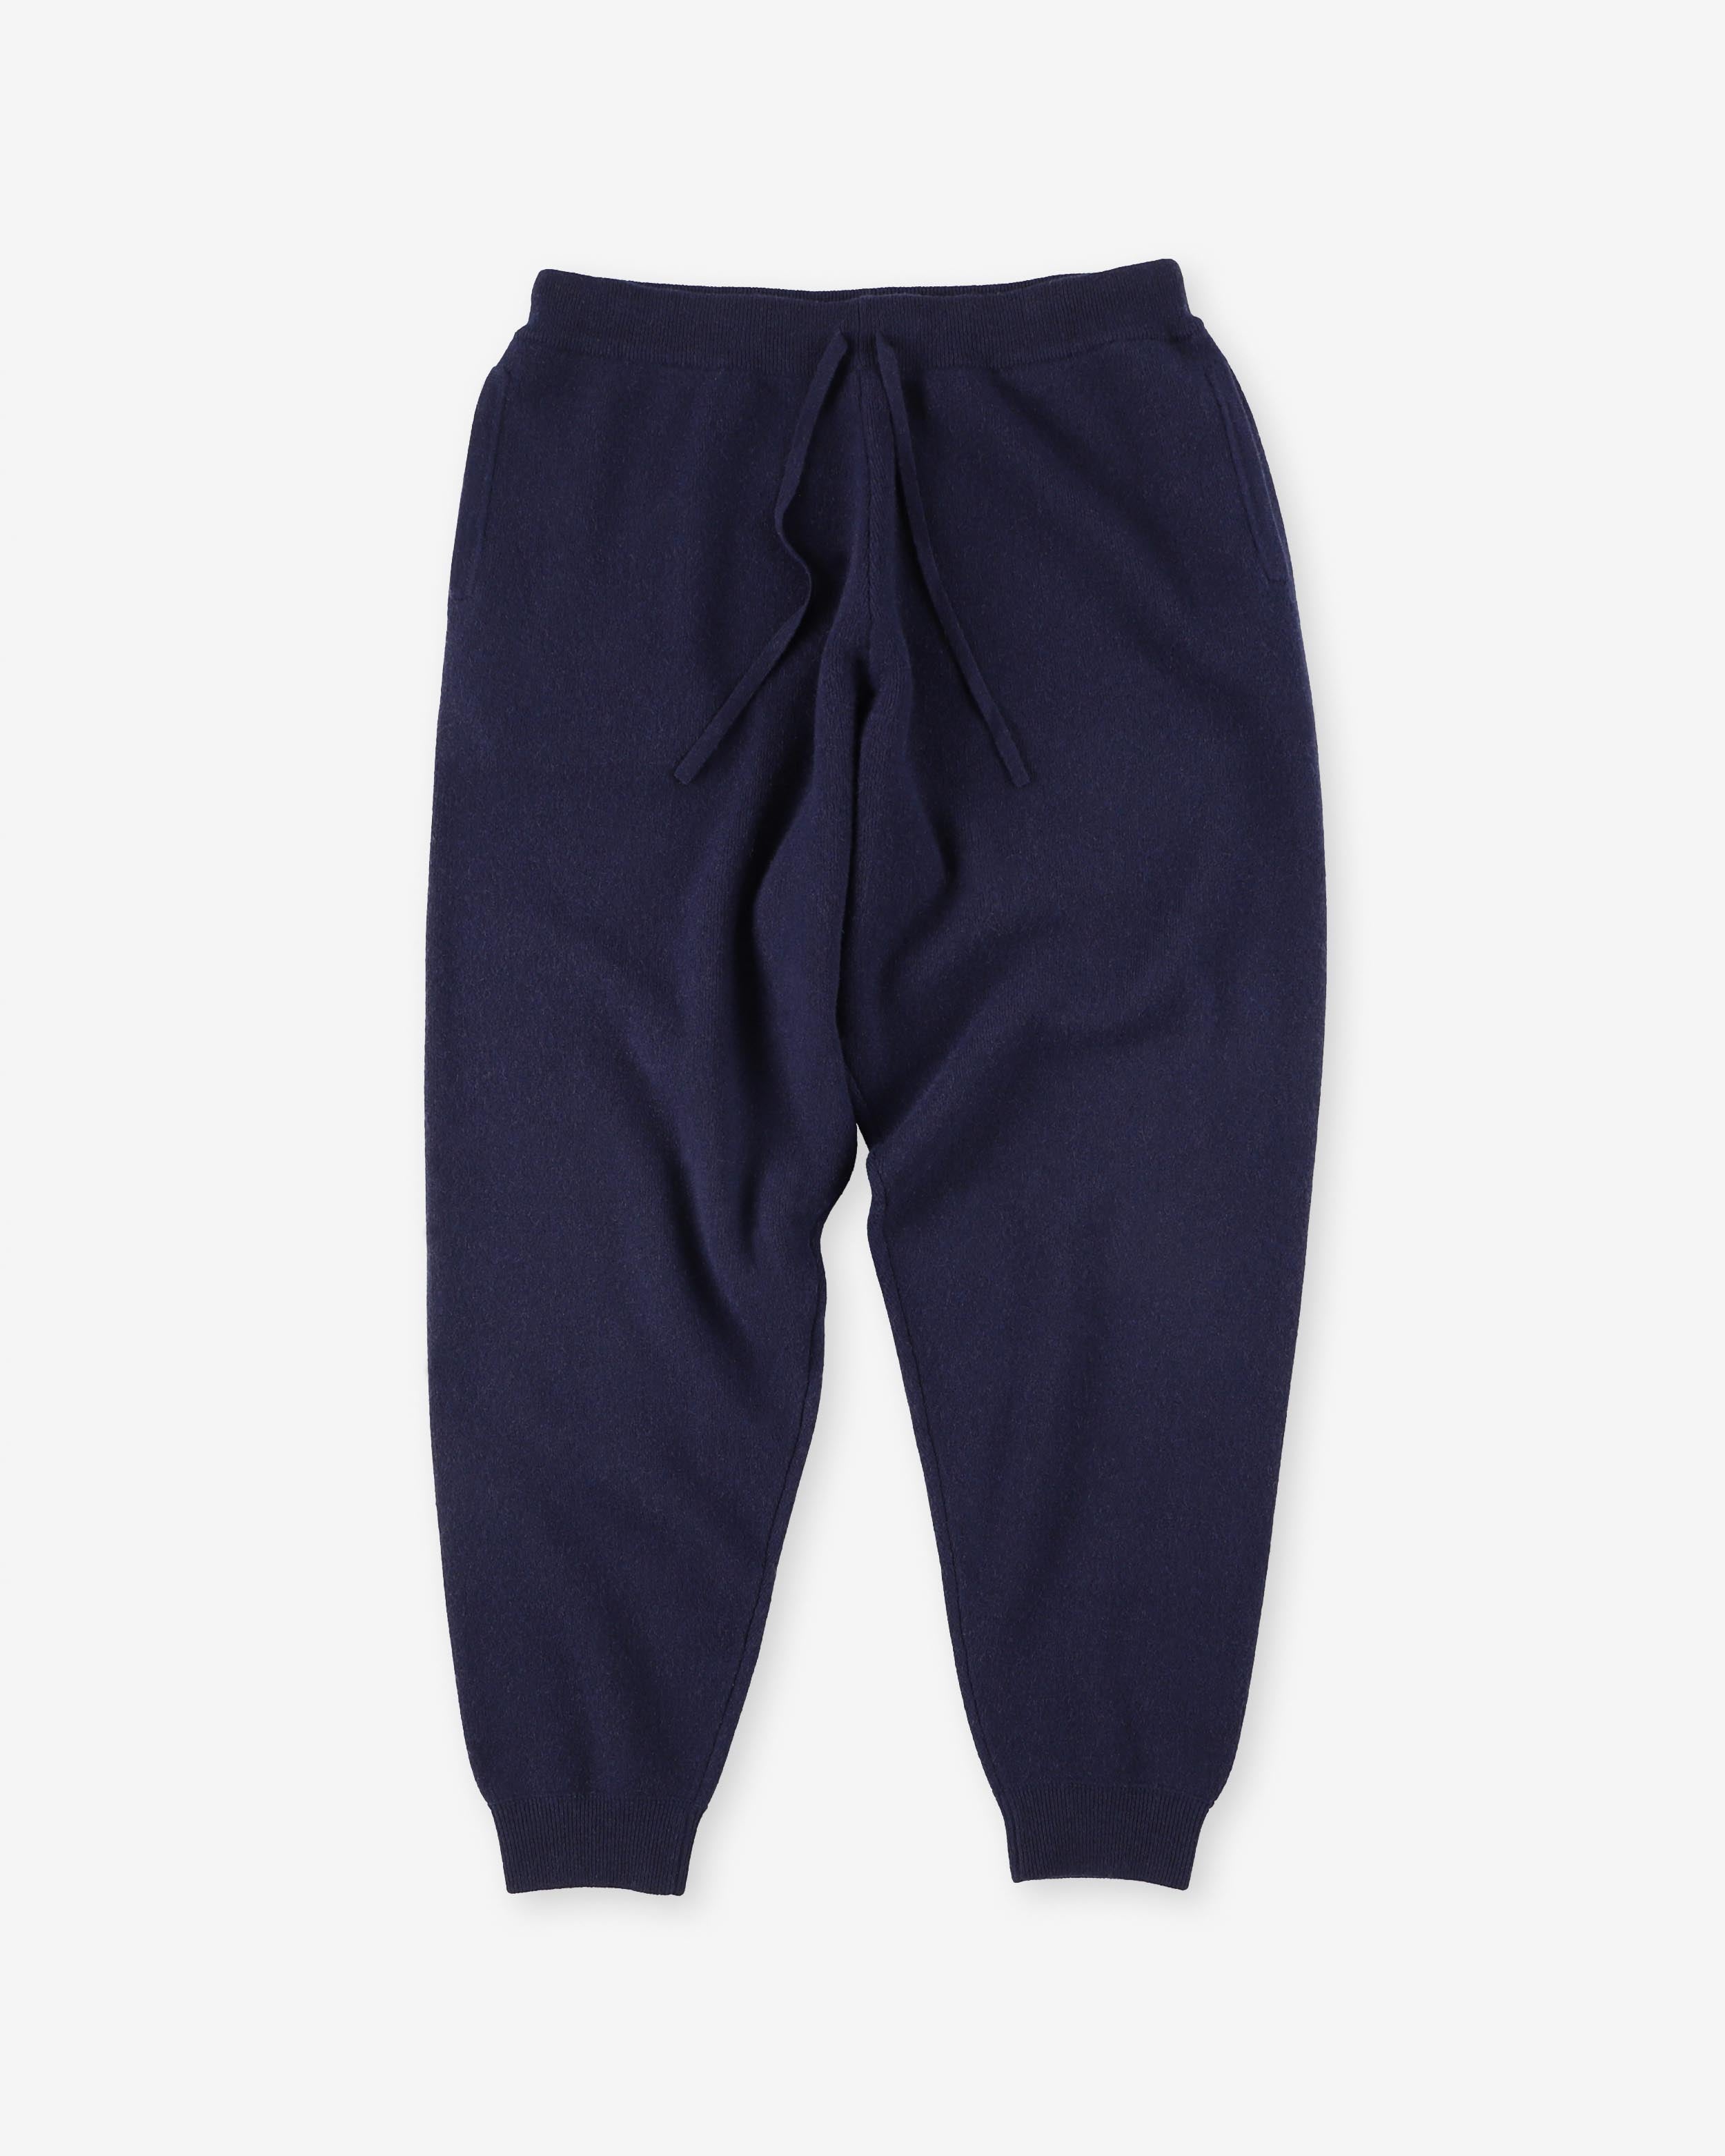 BUDS HEAVY WEIGHT SWEAT  PANTS L